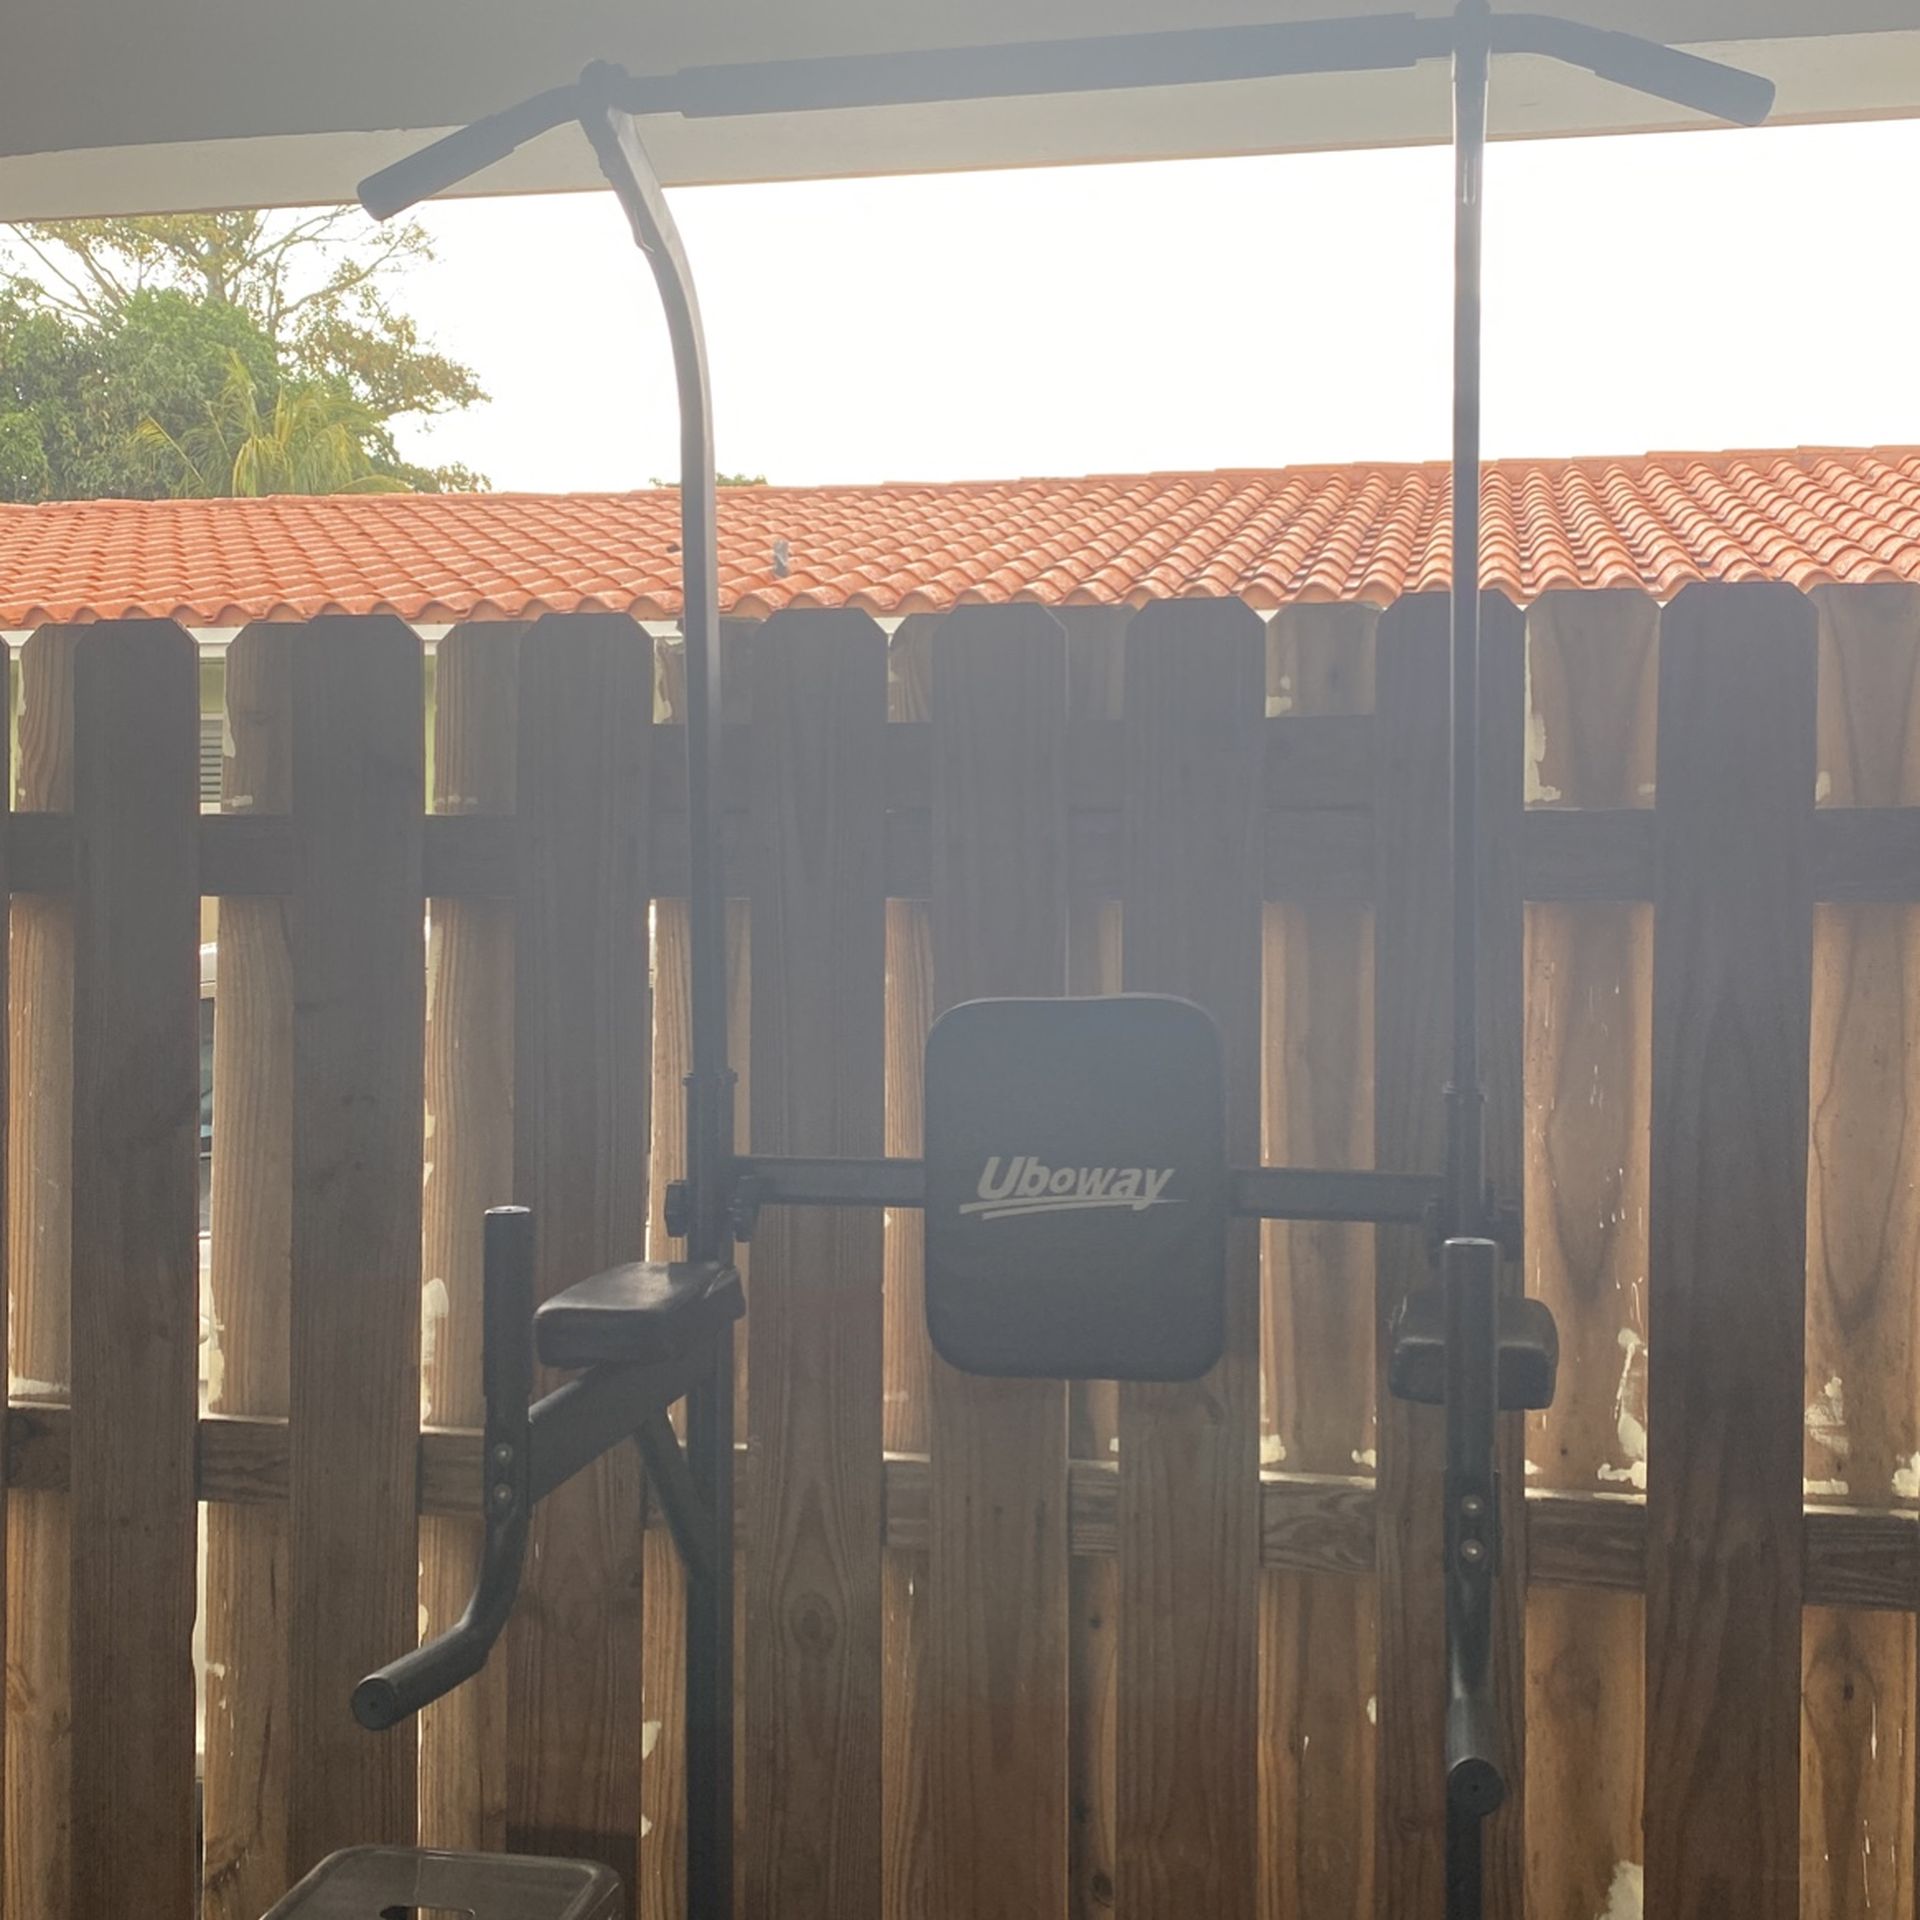 Gym Equipment For Home, Multi-use. Barra Multi Uso Para Hacer Ejercicios